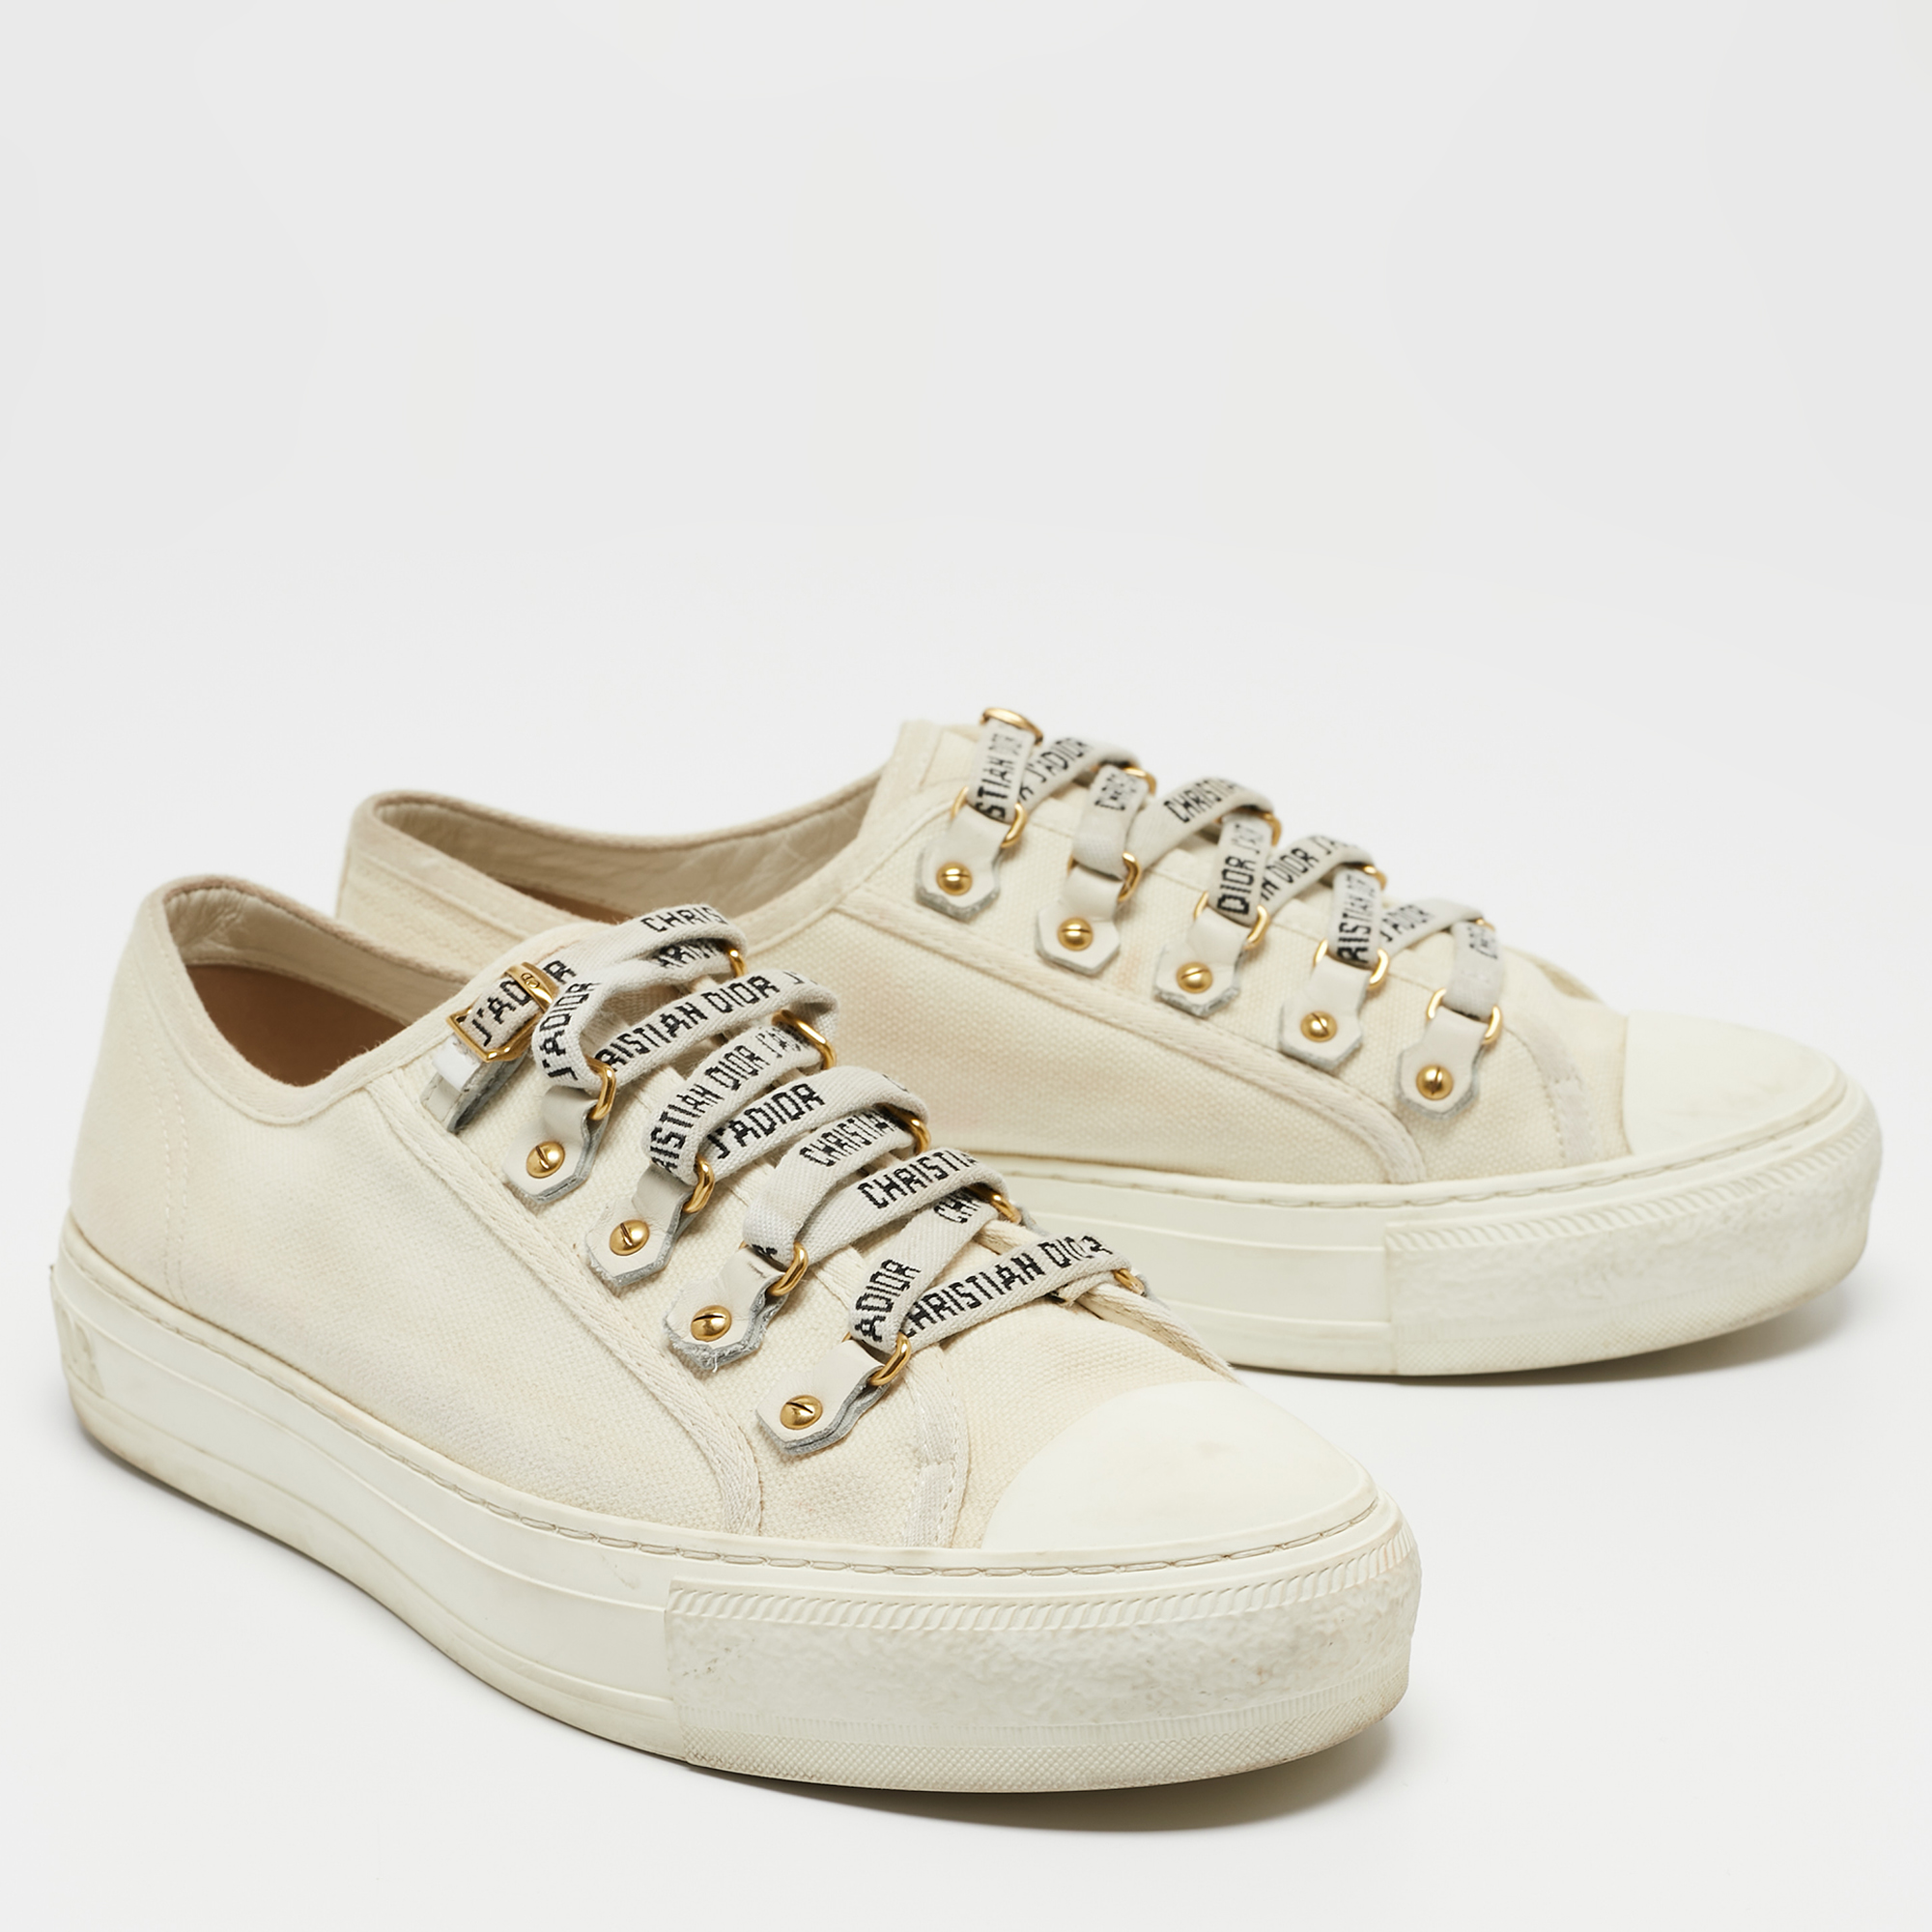 Dior White Canvas Walk'n'Dior Low Top Sneakers Size 39.5